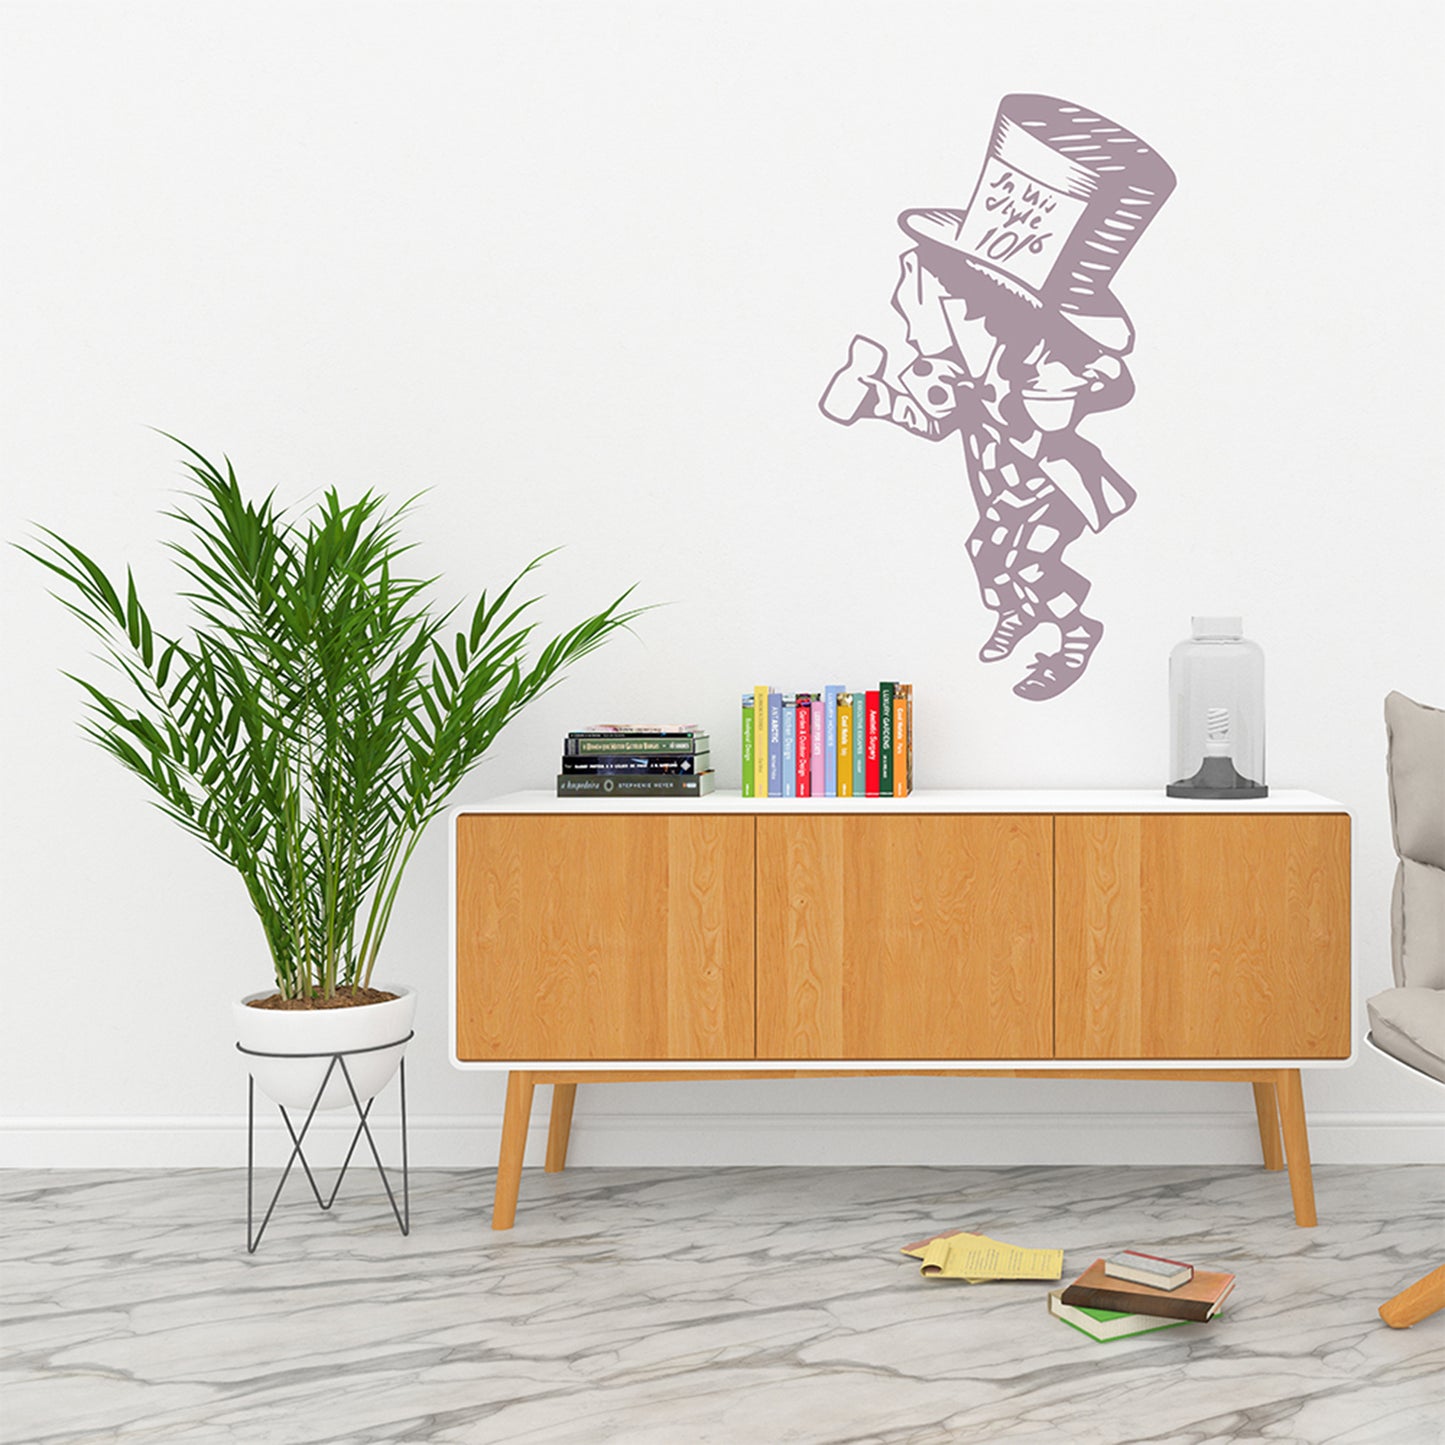 Mad hatter | Alice's adventures in Wonderland | Wall decal